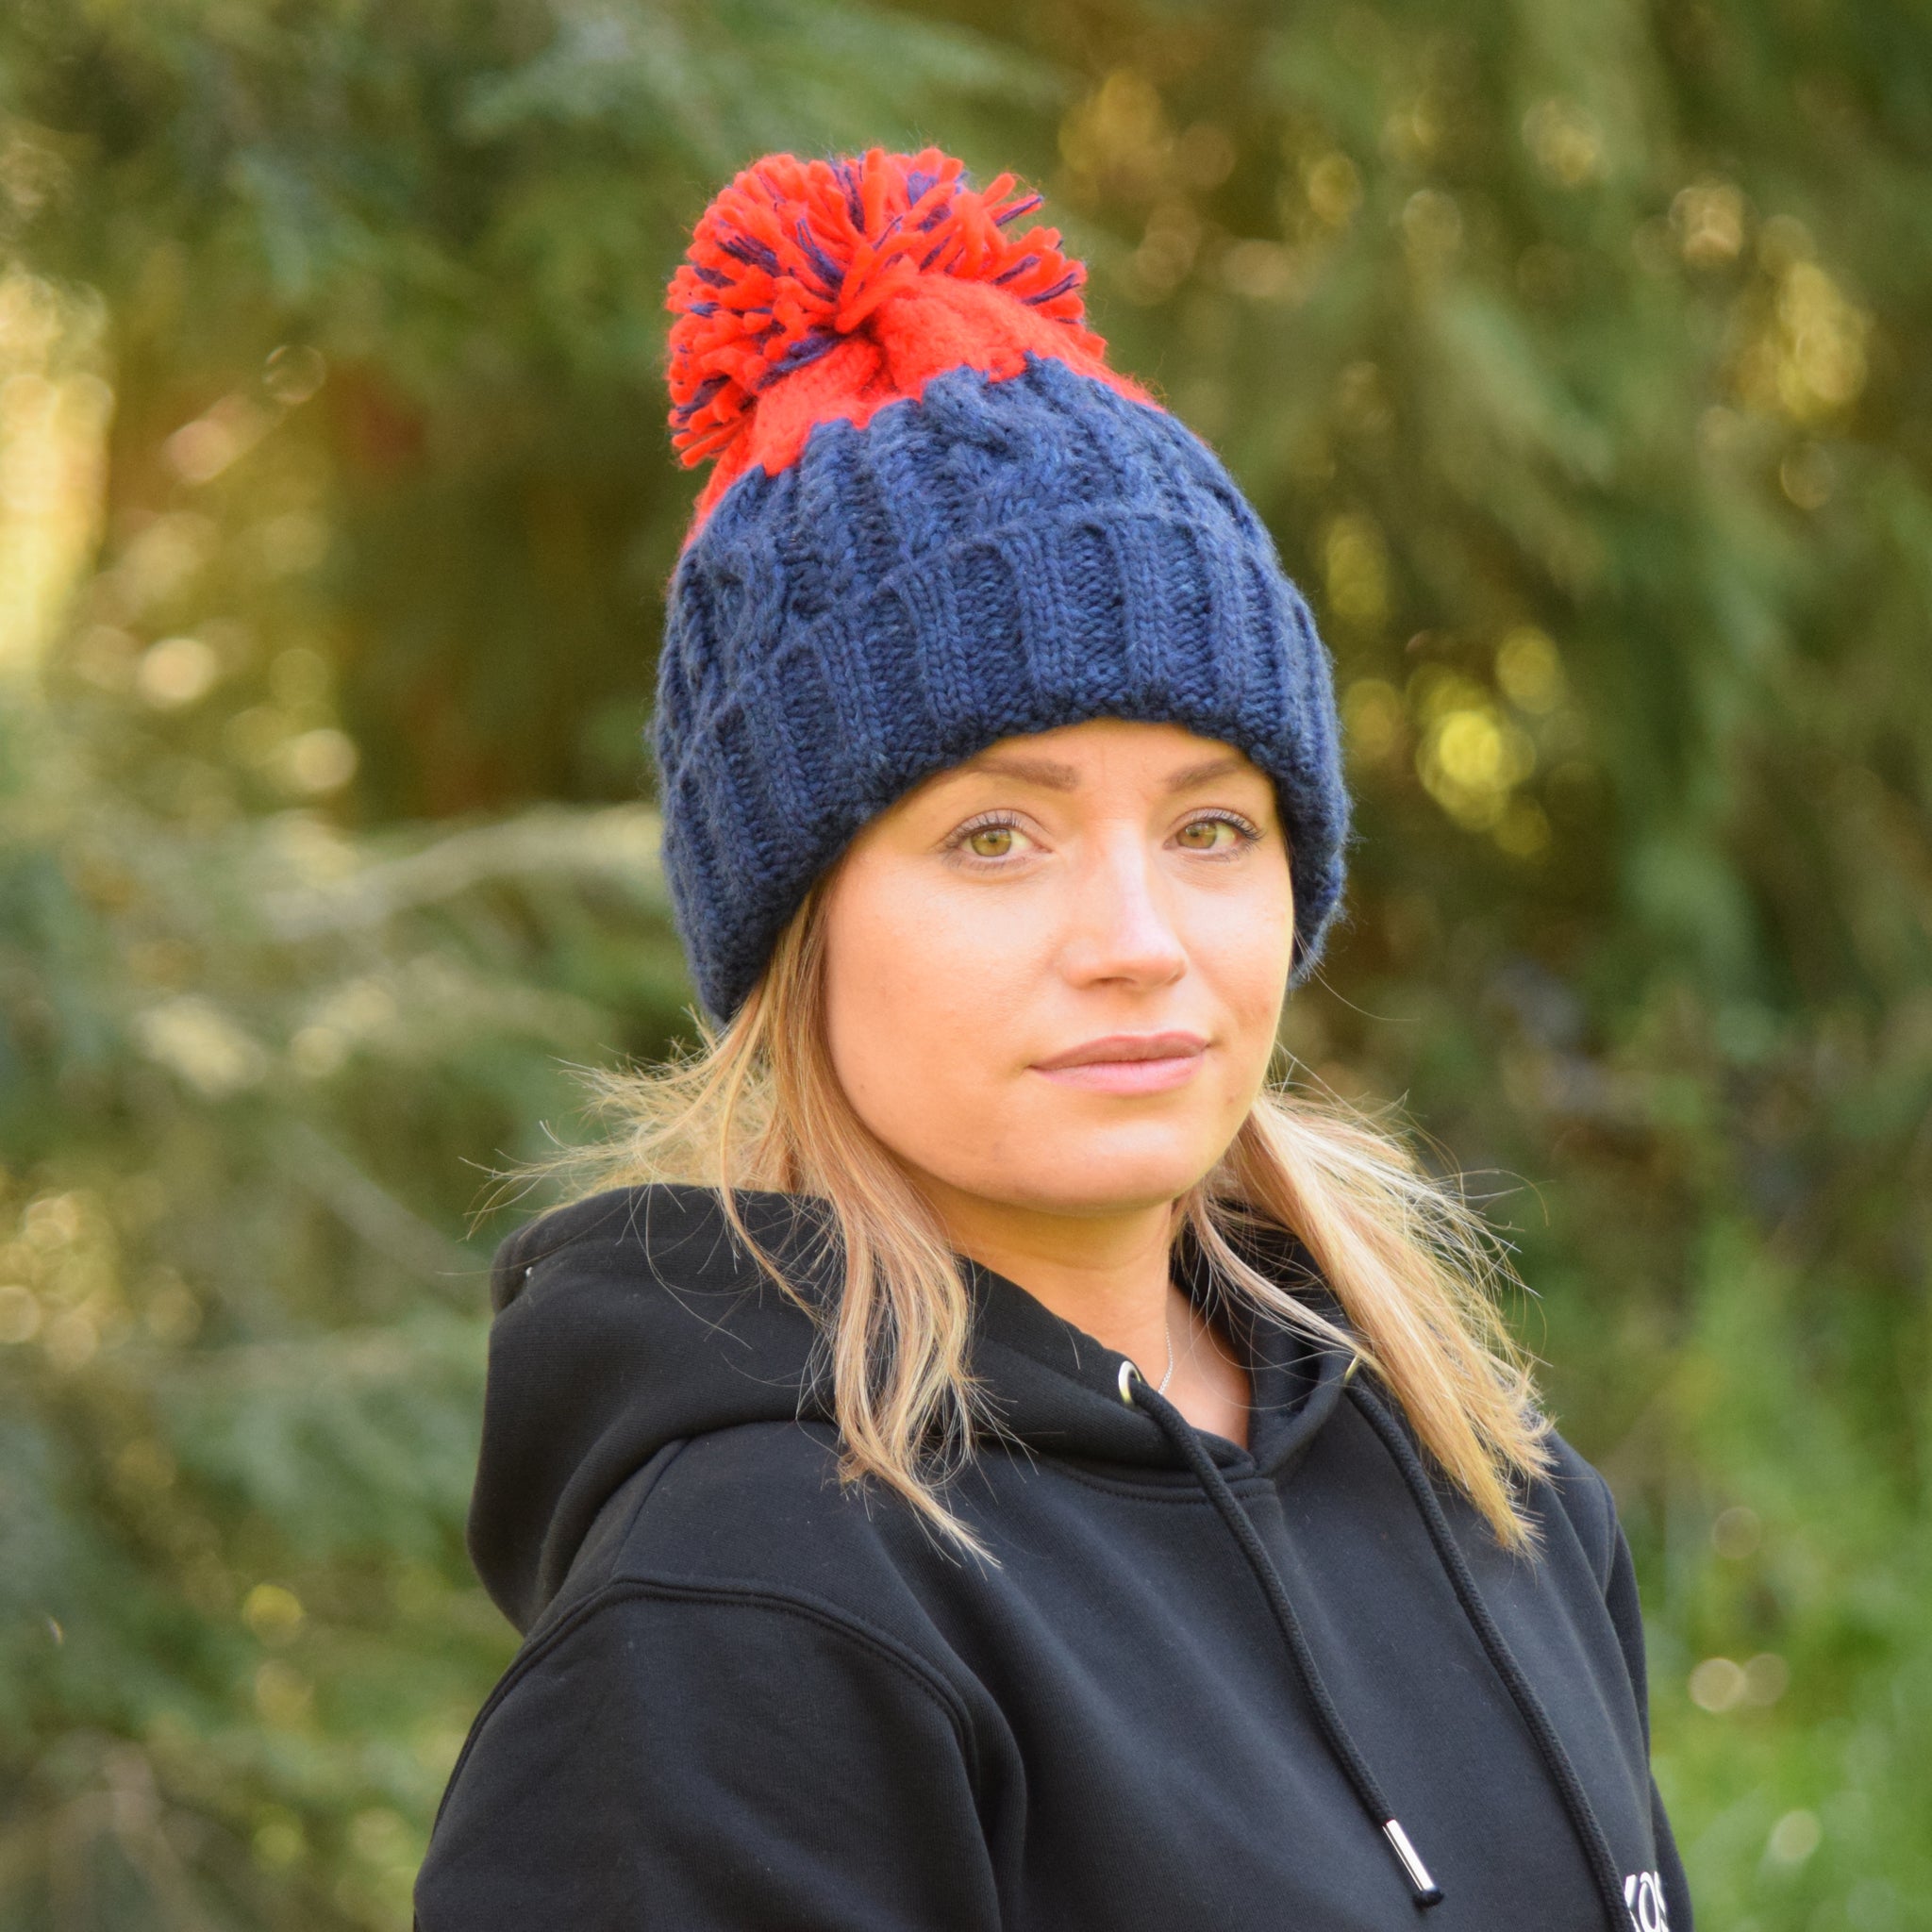 'Journey' Bobble hat - Fire Red/Midnight Blue